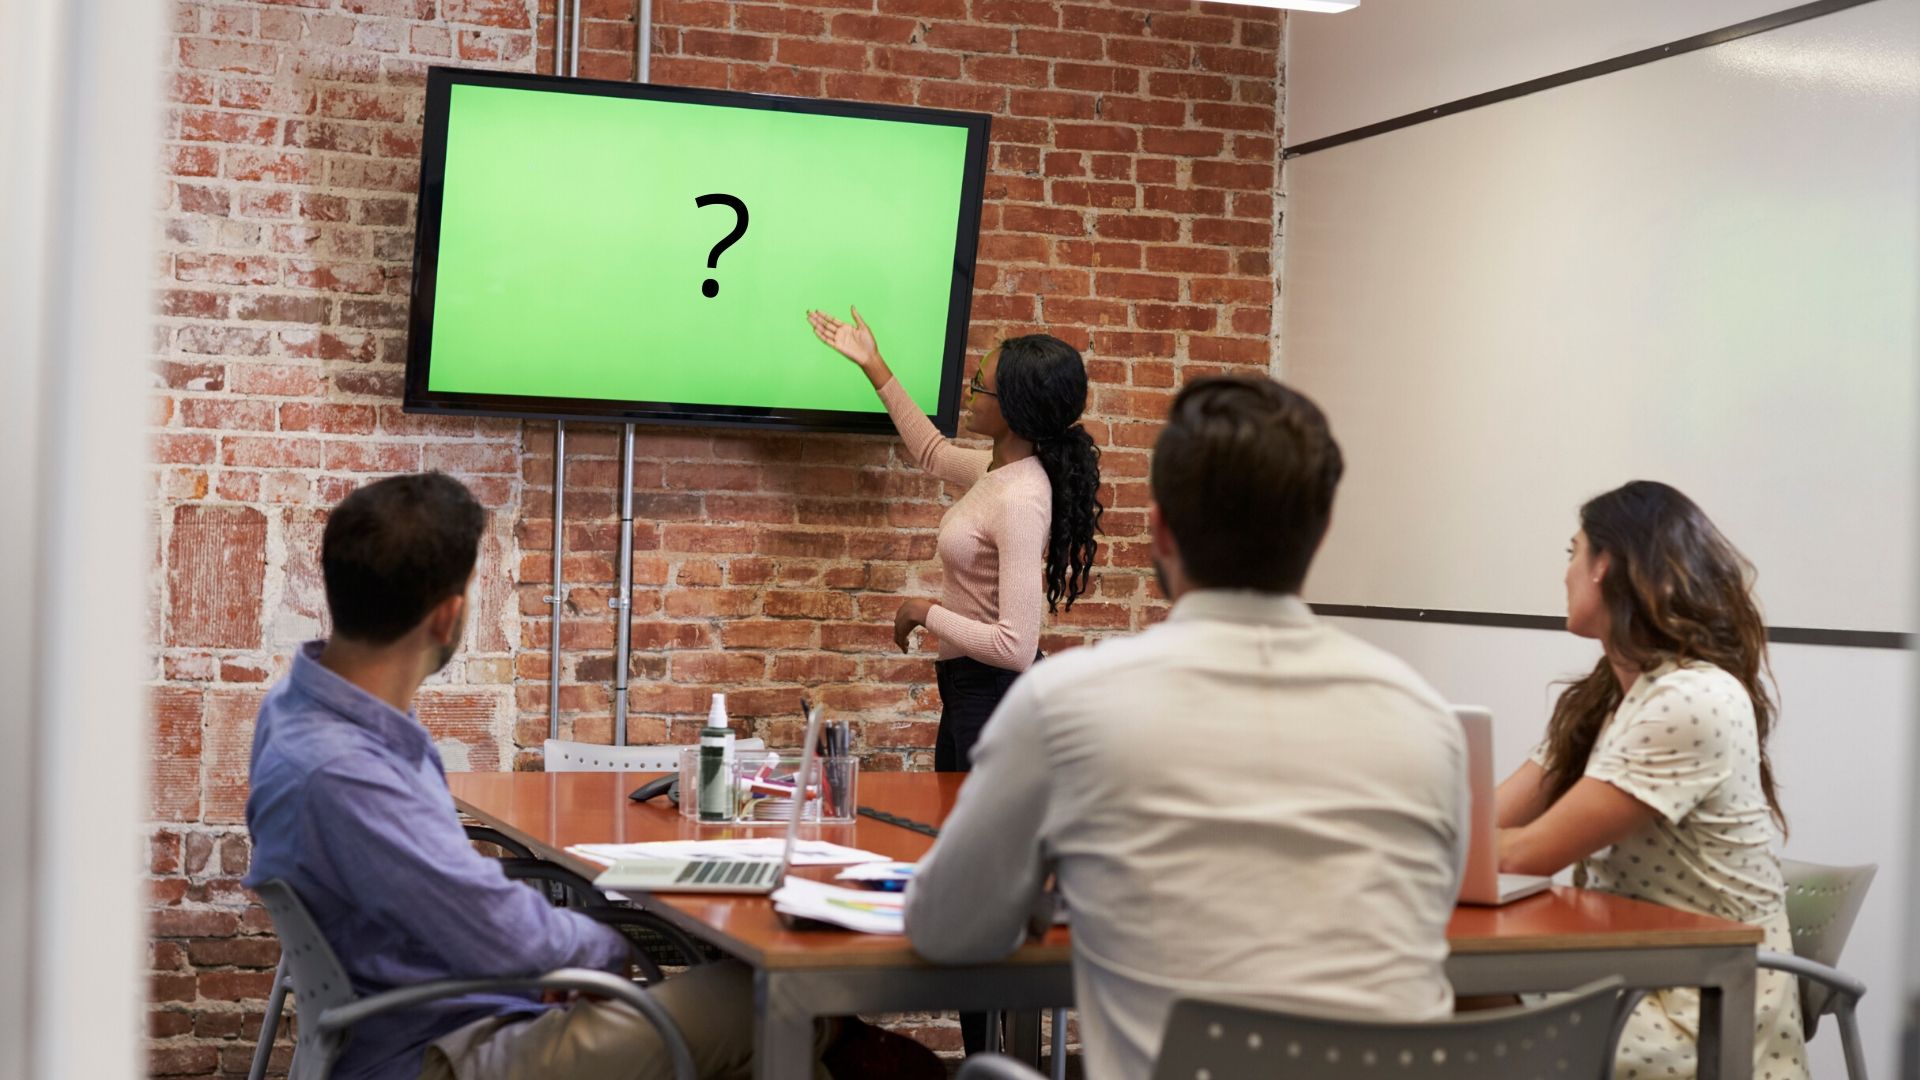 3 people with their backs to the camera are sat at a table watching a person presenting to them. There is a green tv screen with a question mark on it.